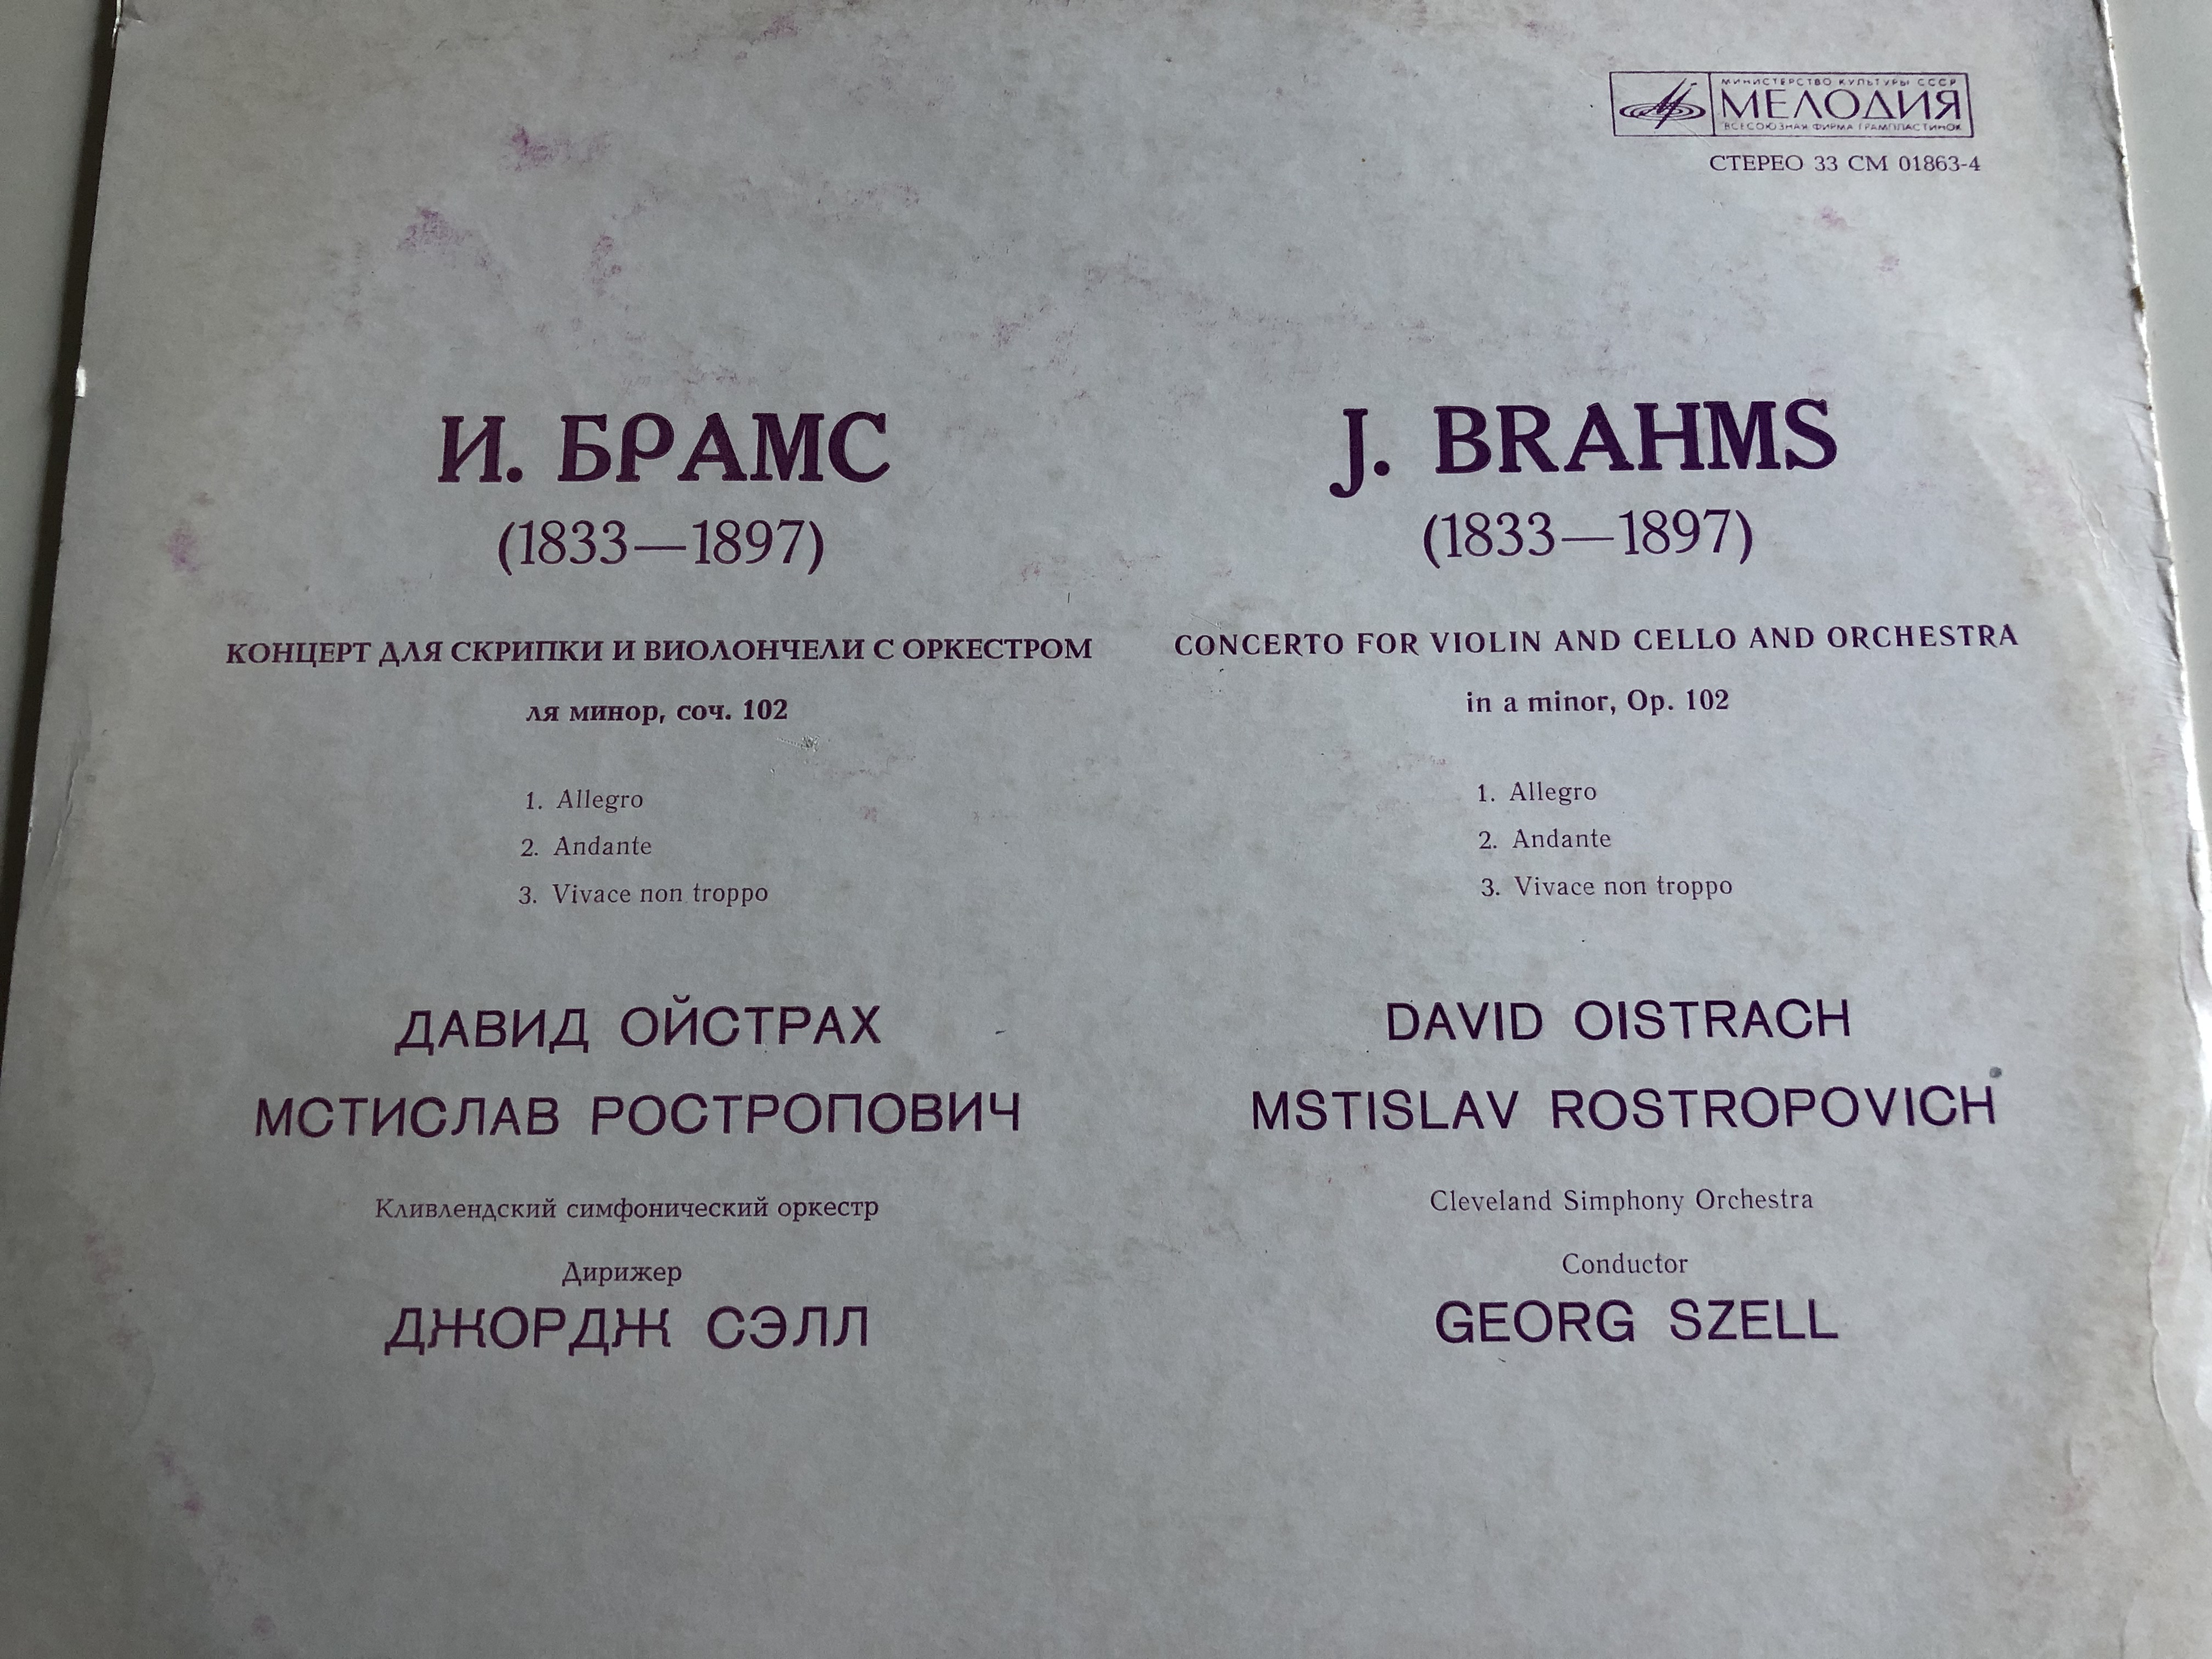 j.-brahms-concerto-for-violin-and-cello-and-orchestra-in-a-minor-op.-102-david-oistrakh-mstislav-rostropovich-cleveland-symphony-orchestra-conductor-george-szell-lp-stereo-33cm-4-.jpg